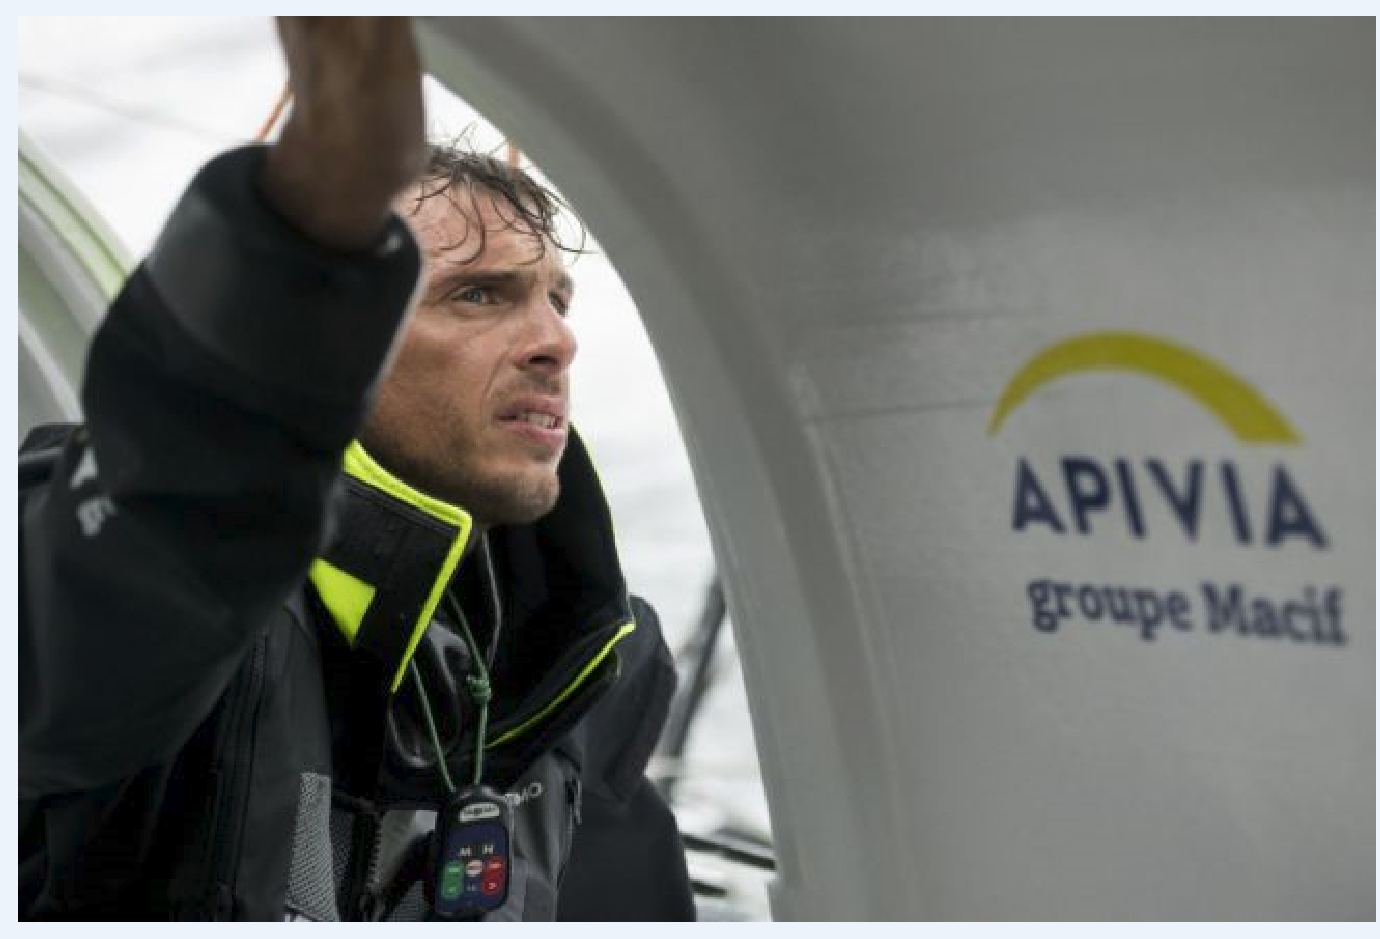 Vendée Globe: Day 59, 35 miles between Dalin, 2nd and Ruyant 4th